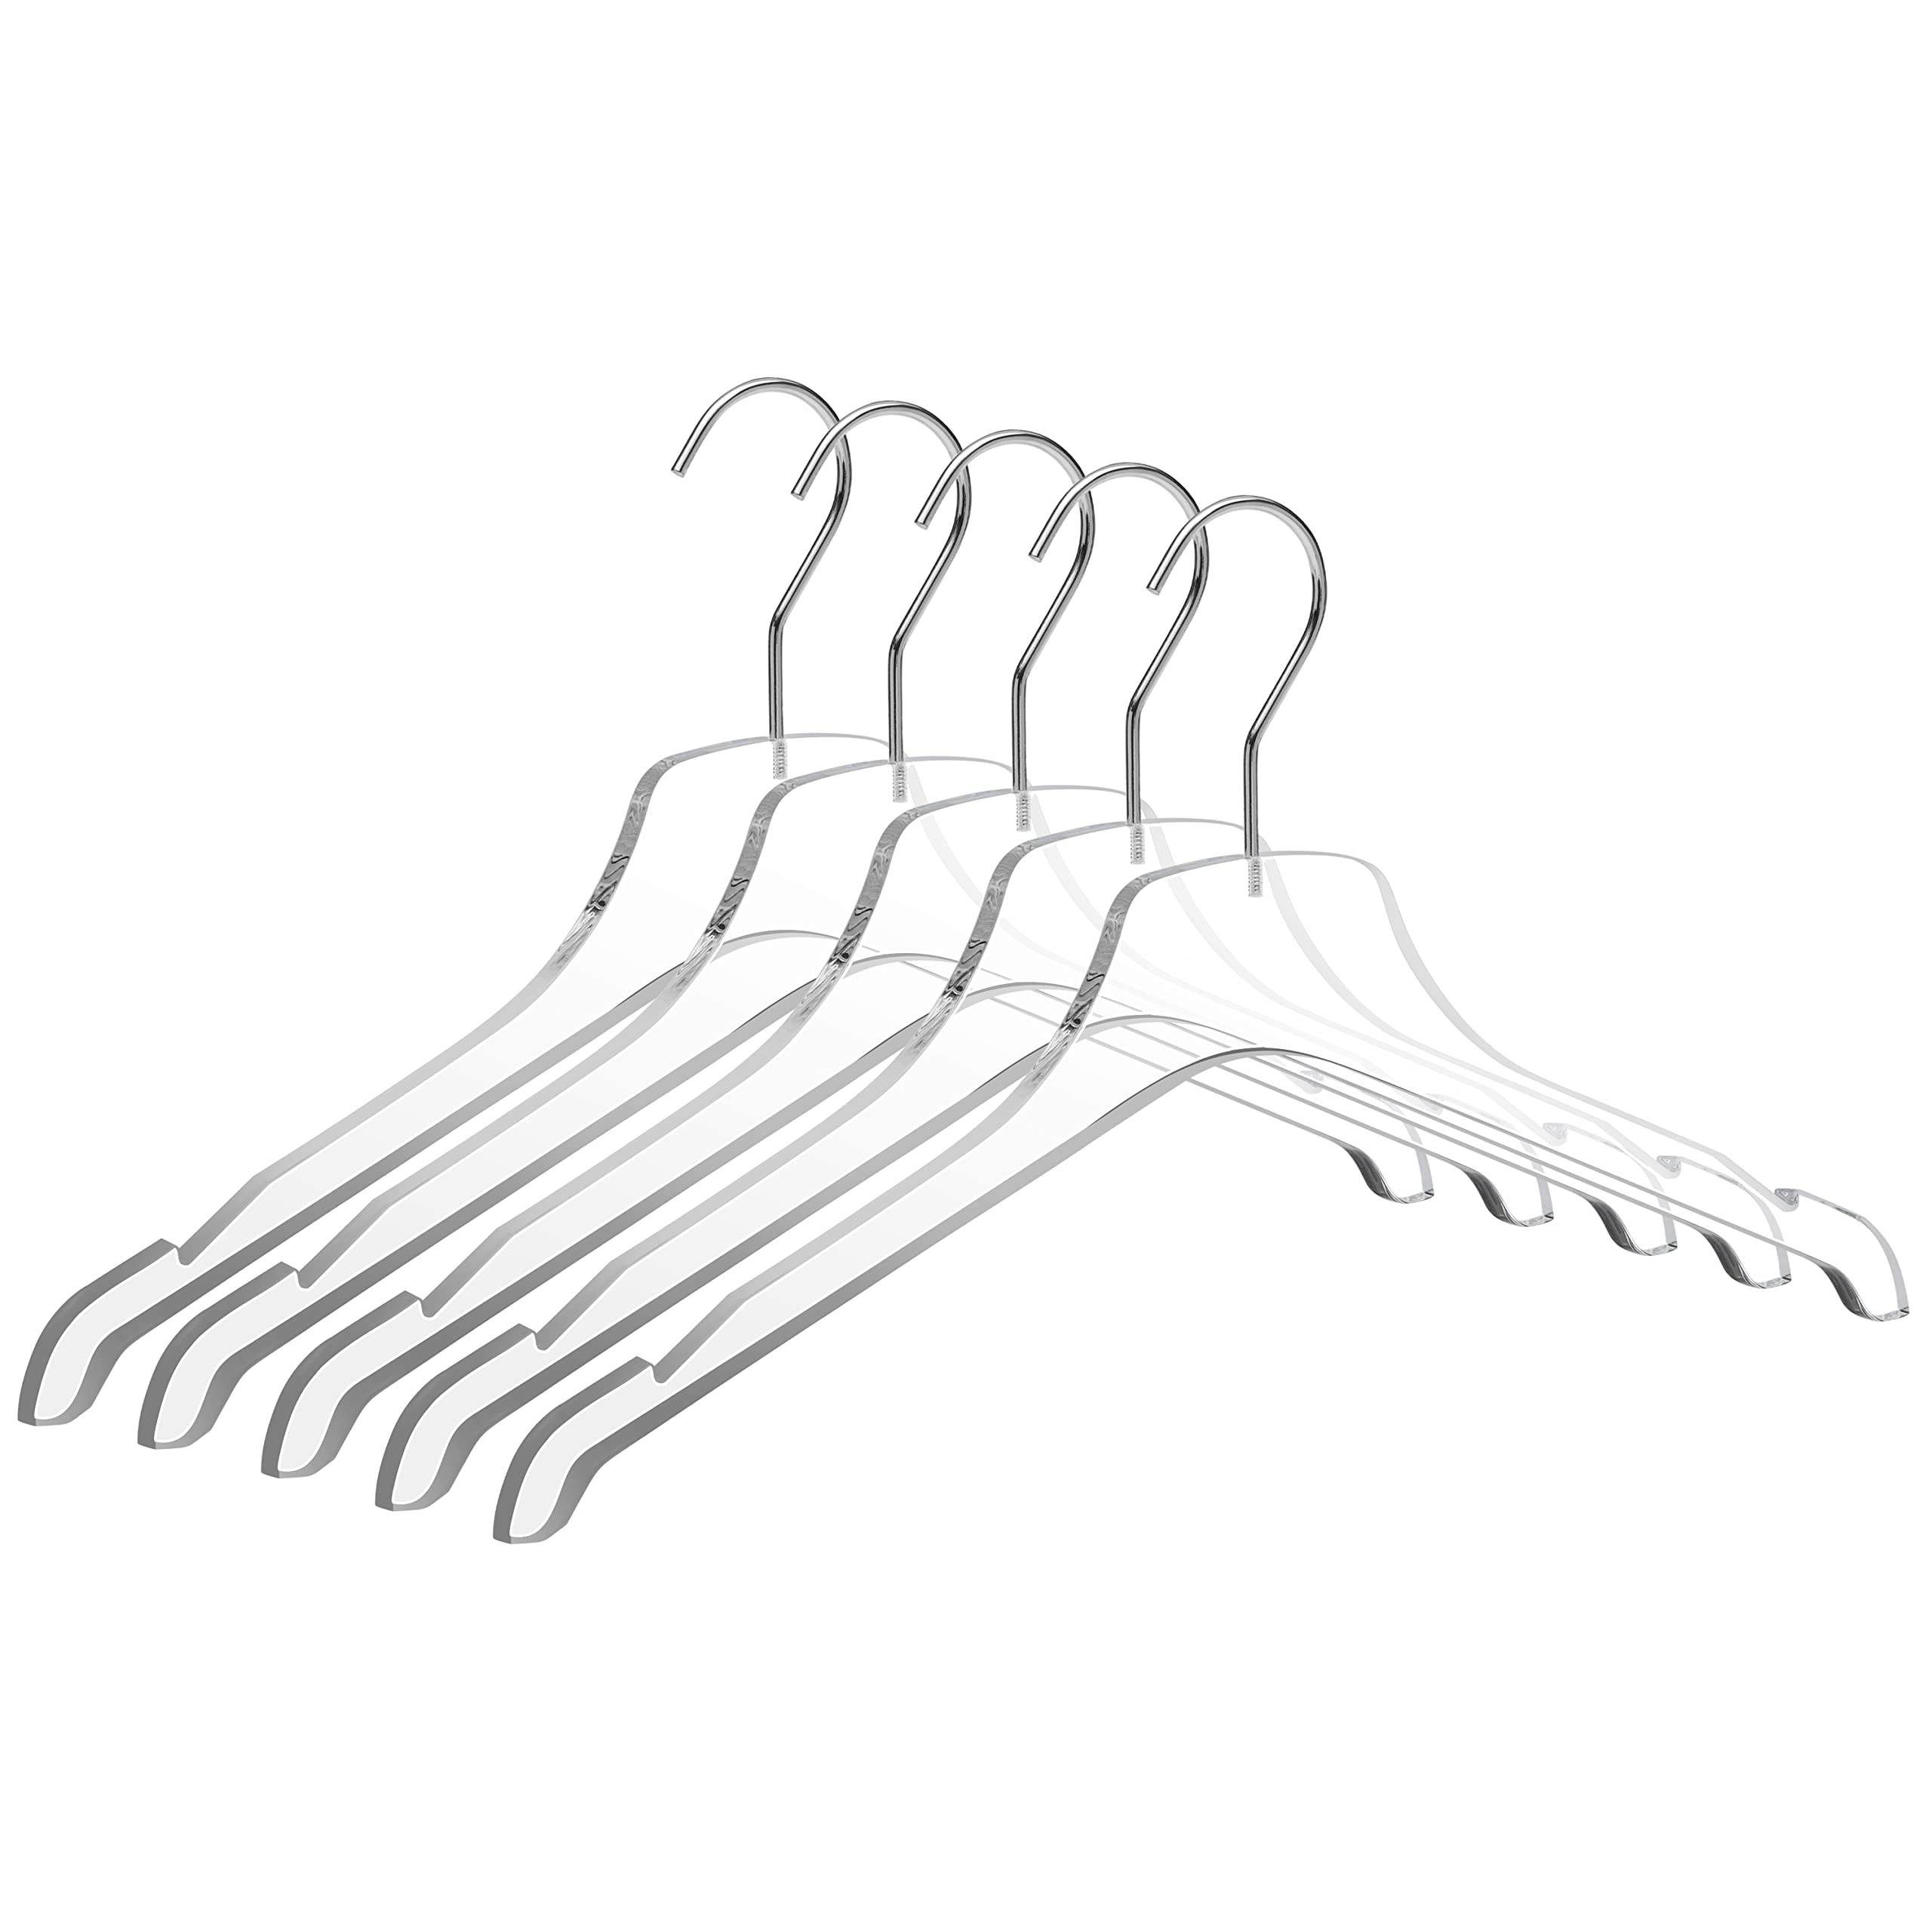 Quality Acrylic Clear Hangers, Made of Clear Acrylic for a Luxurious Look and Feel with Swivel Hook - 5 Pack  - Like New